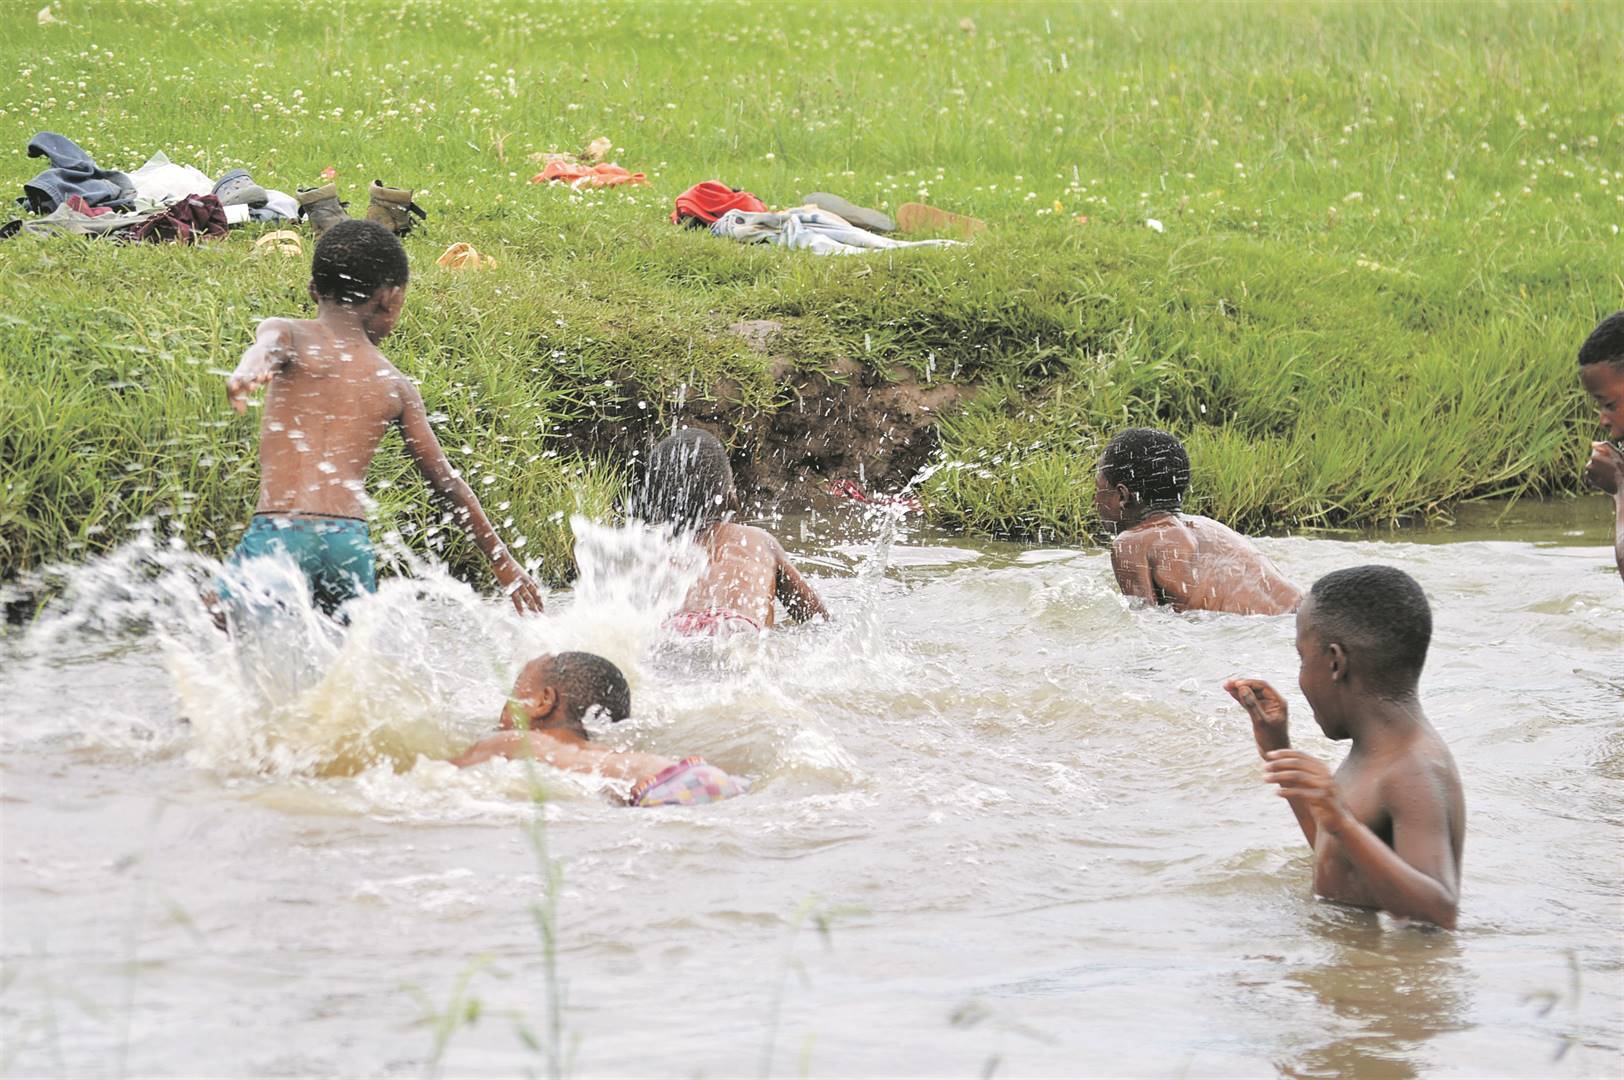 When the heatwave hits, boys from Orange Farm swim in a local stream. However, they swim in kak water as sewage from broken manholes spill into the stream.             Photos by Tumelo Mofokeng